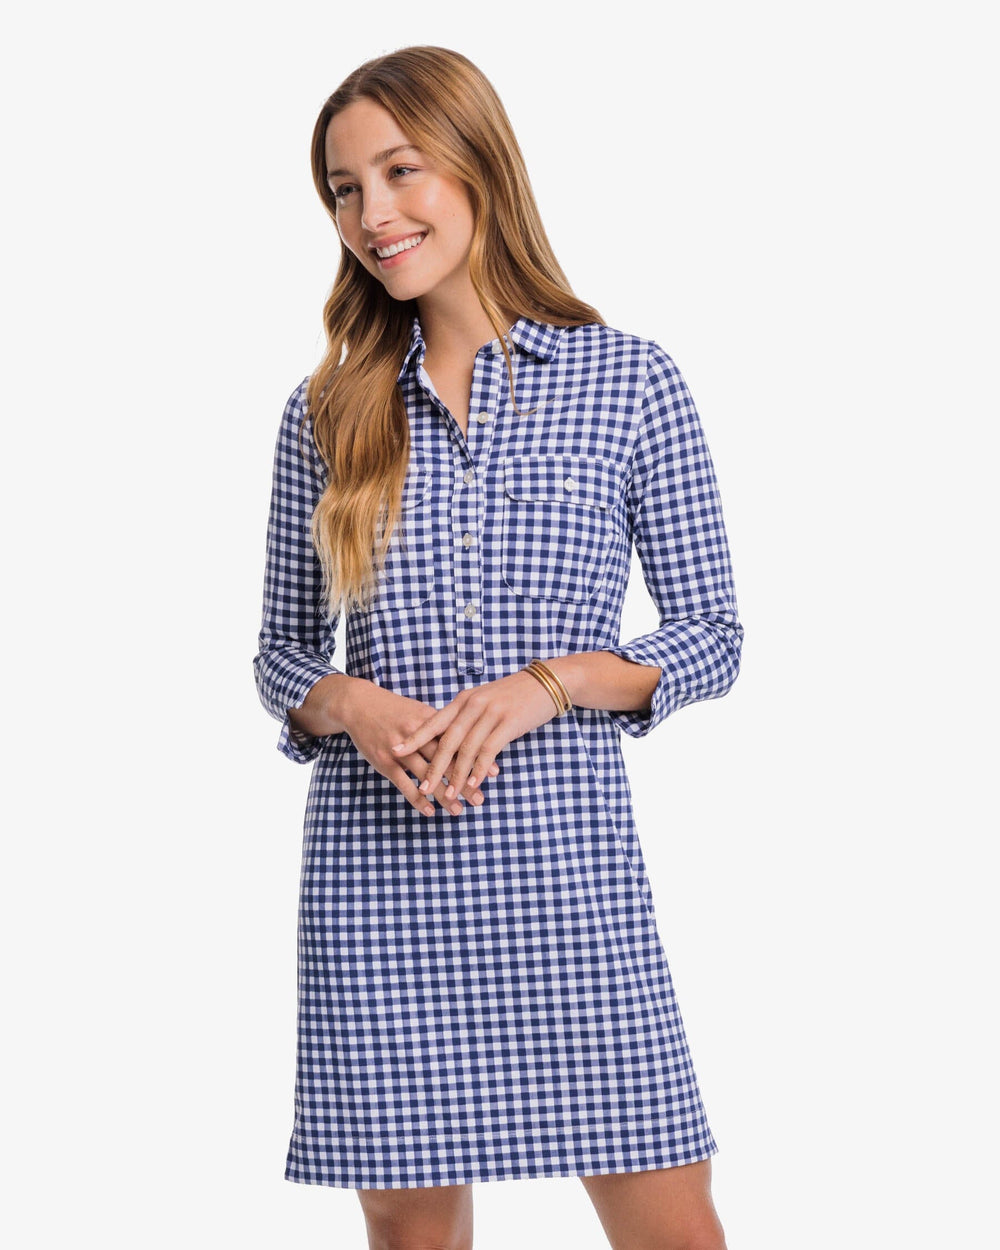 The front view of the Southern Tide Jessica Gingham Performance Dress by Southern Tide - Nautical Navy